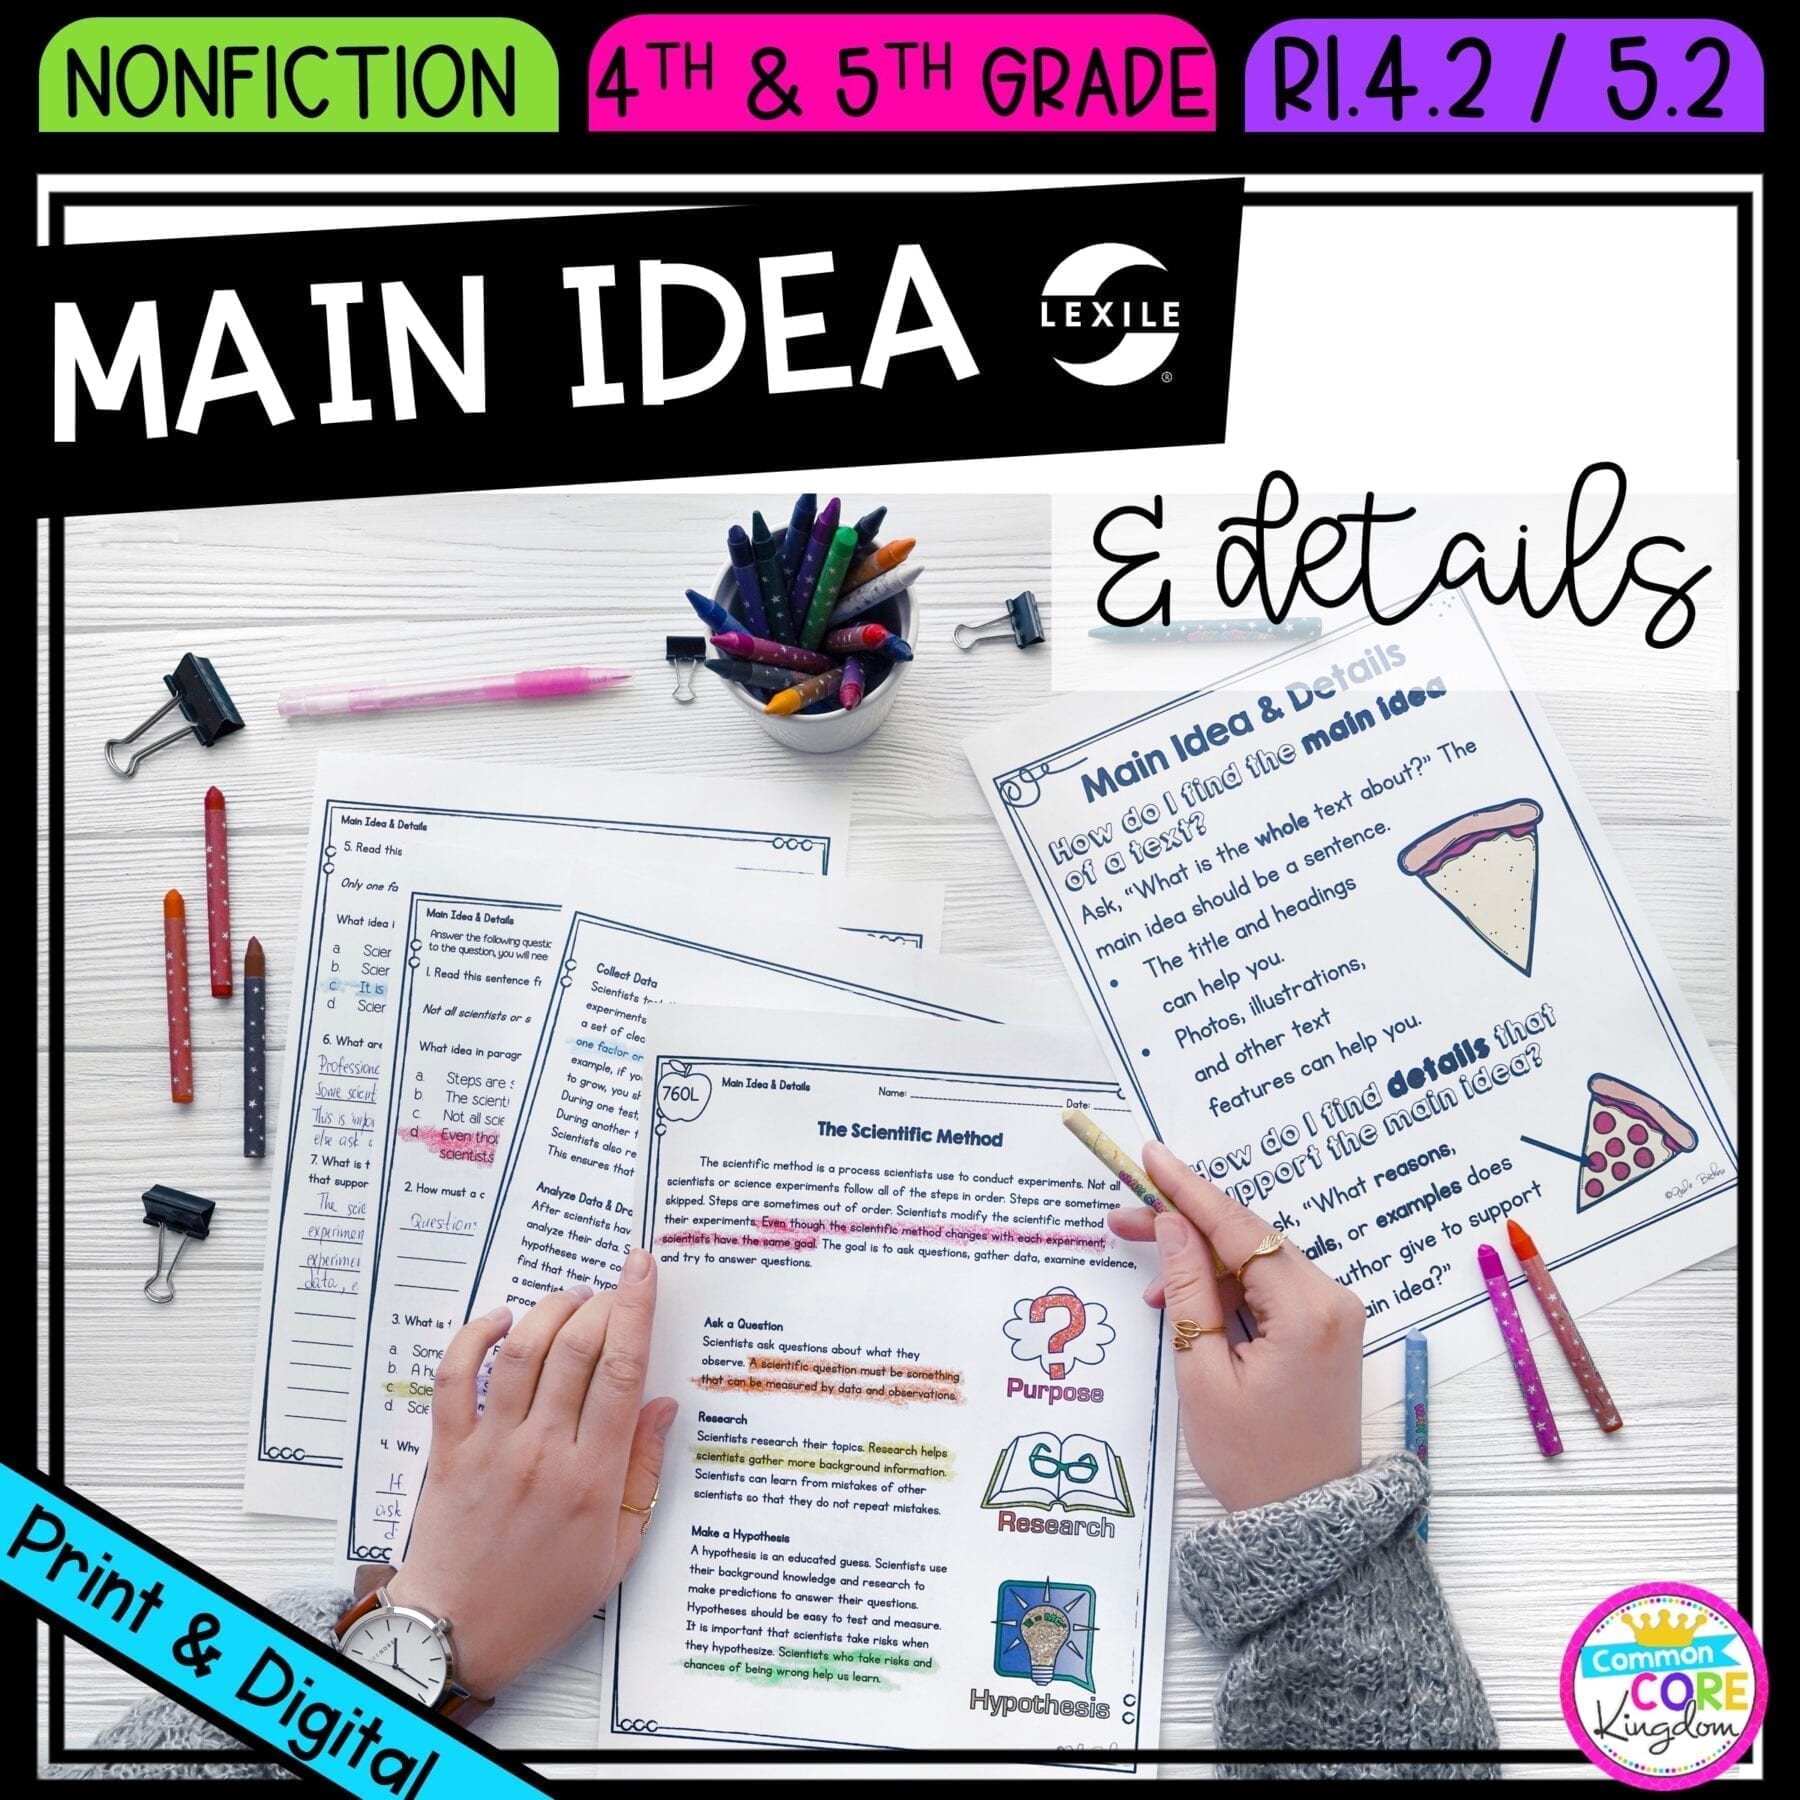 Main Idea and Details in Nonfiction for 4th & 5th grade cover showing printable and digital worksheets